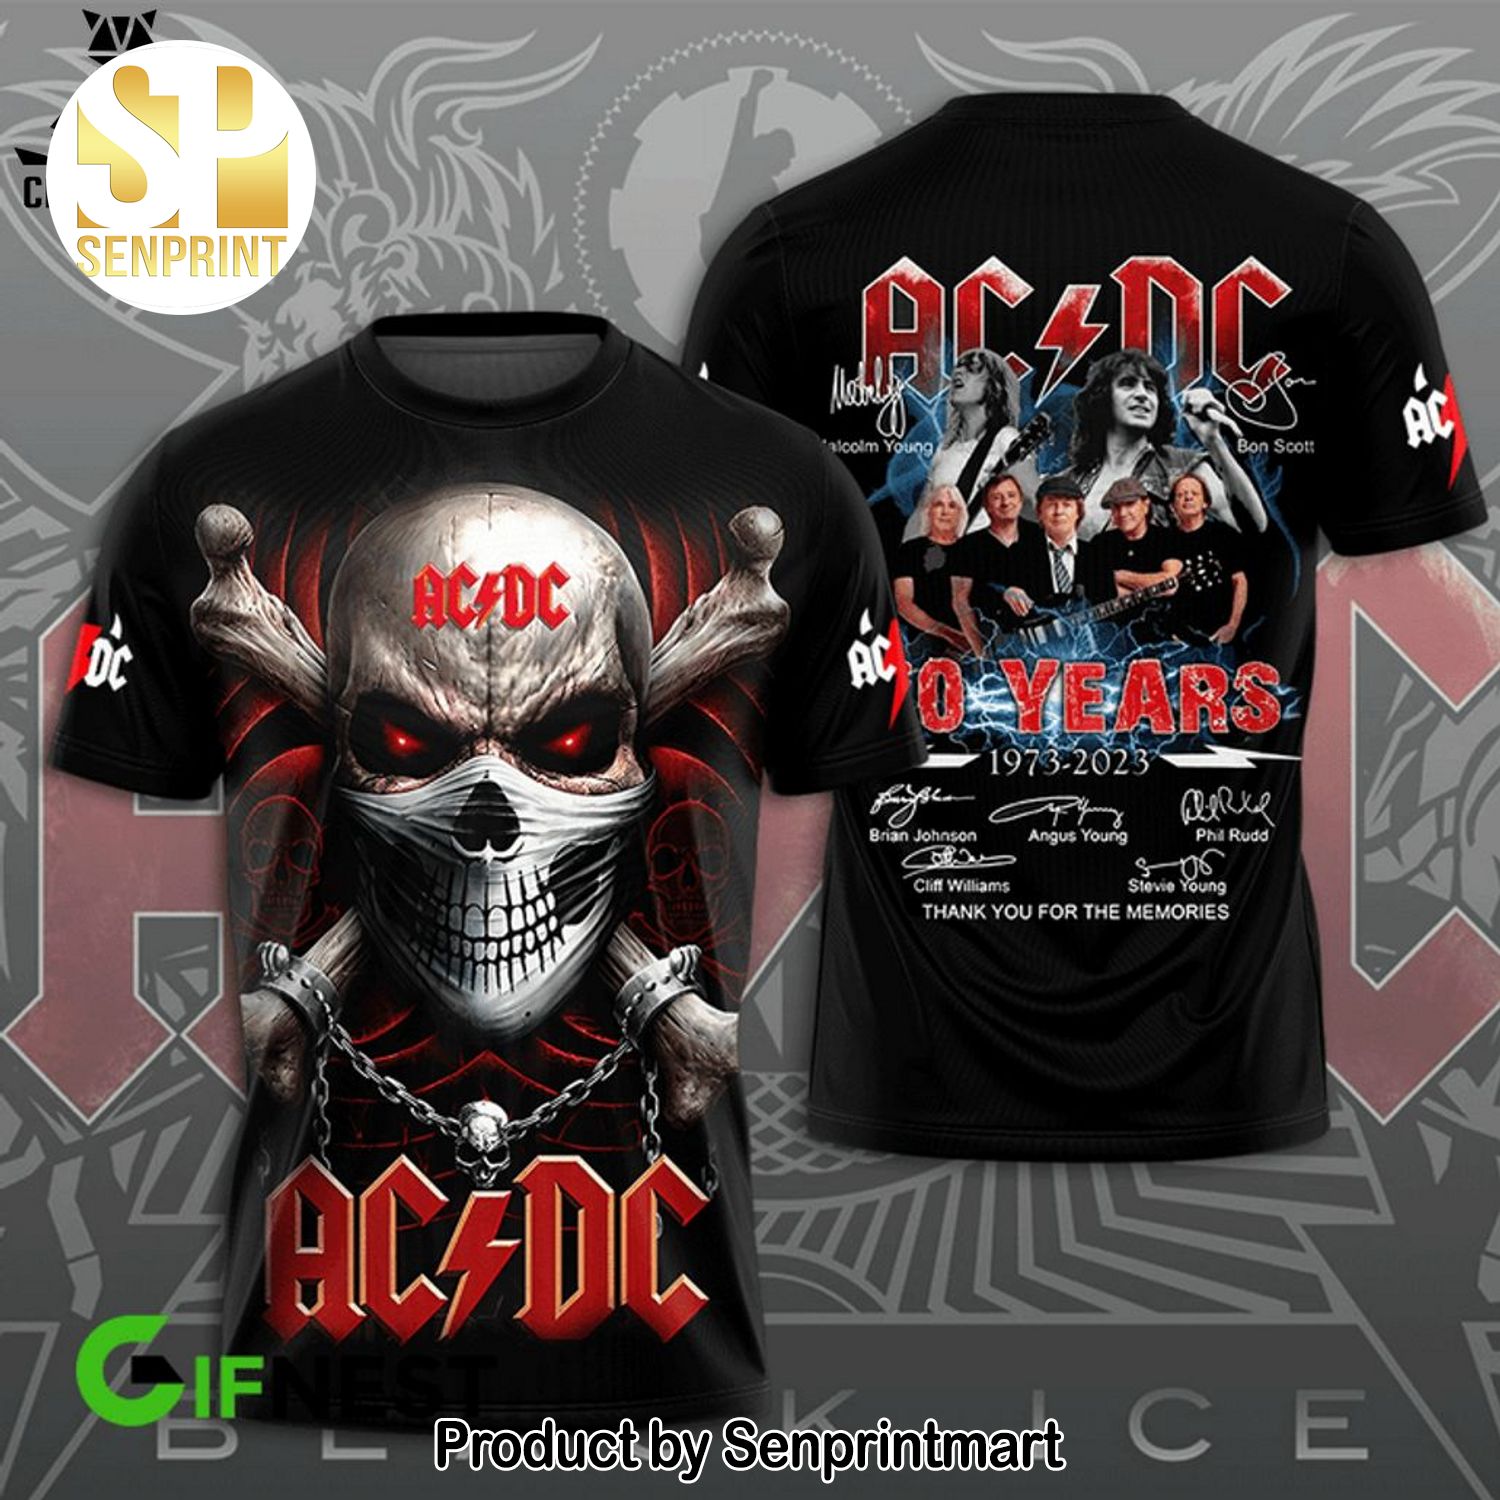 AC DC 50 Years 1973-2023 Thank You For The Memories Full Printed Shirt